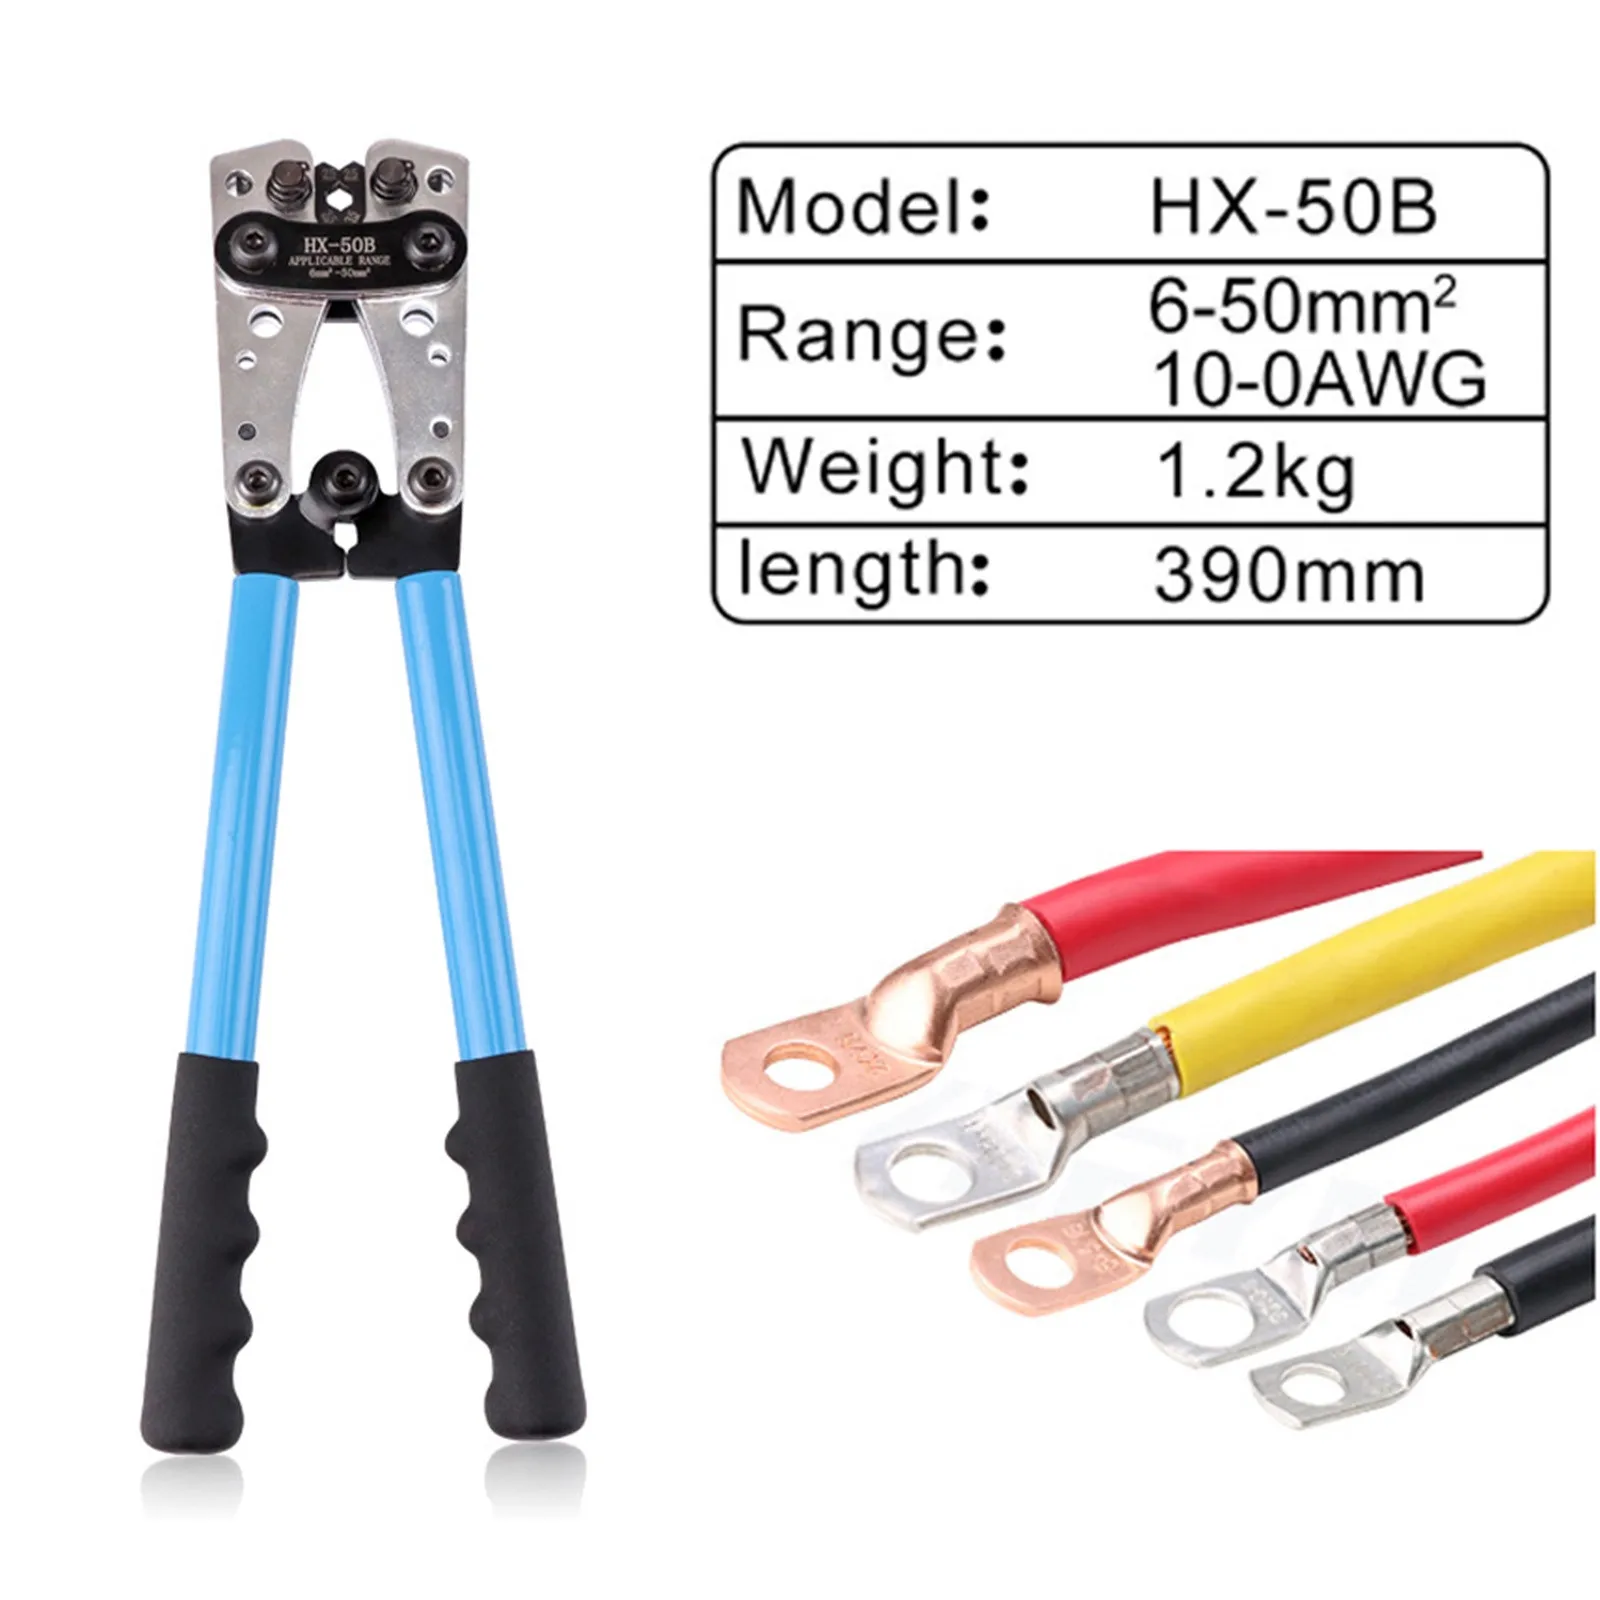 

Tube Terminal Crimper Hex Crimp Tools HX-50B Pliers 6-50mm2/AWG 10-0 Multitool Battery Cable Lug Cable Hand Tools